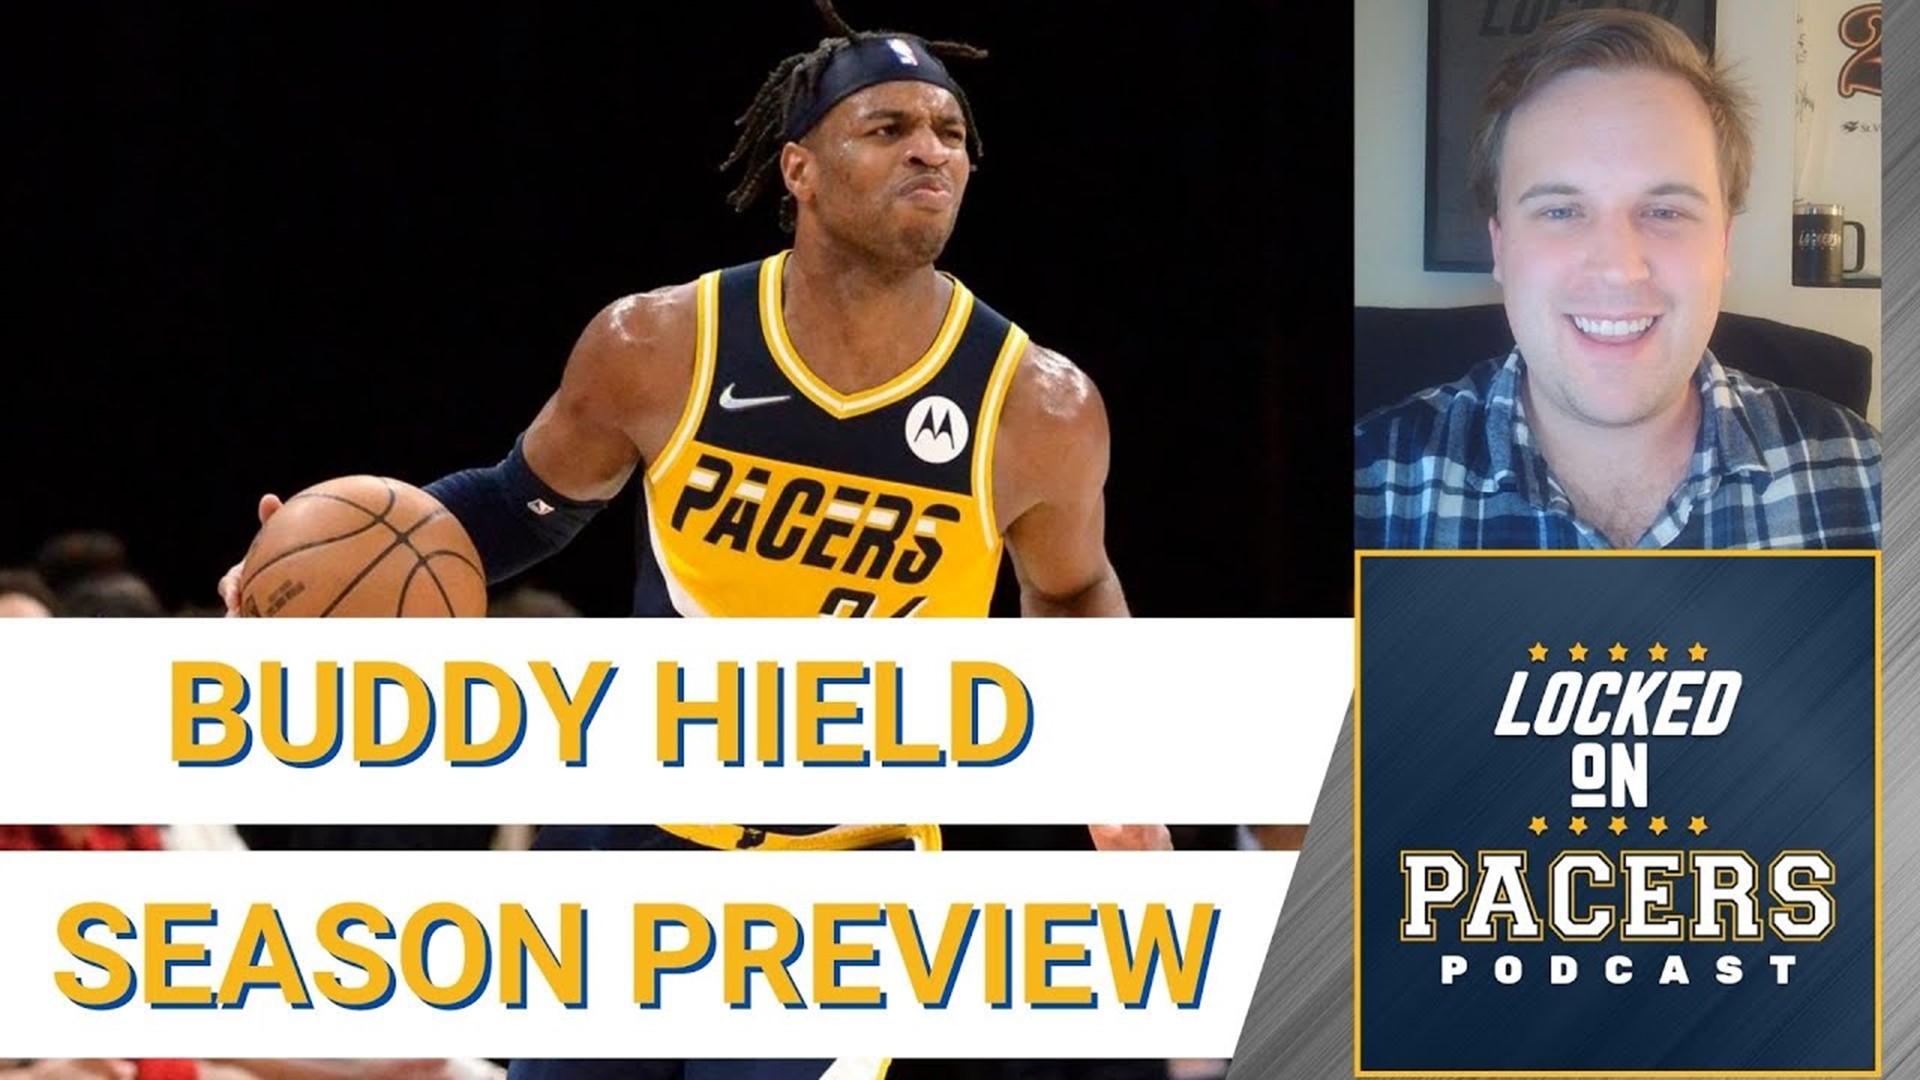 buddy hield wallpaper pacers